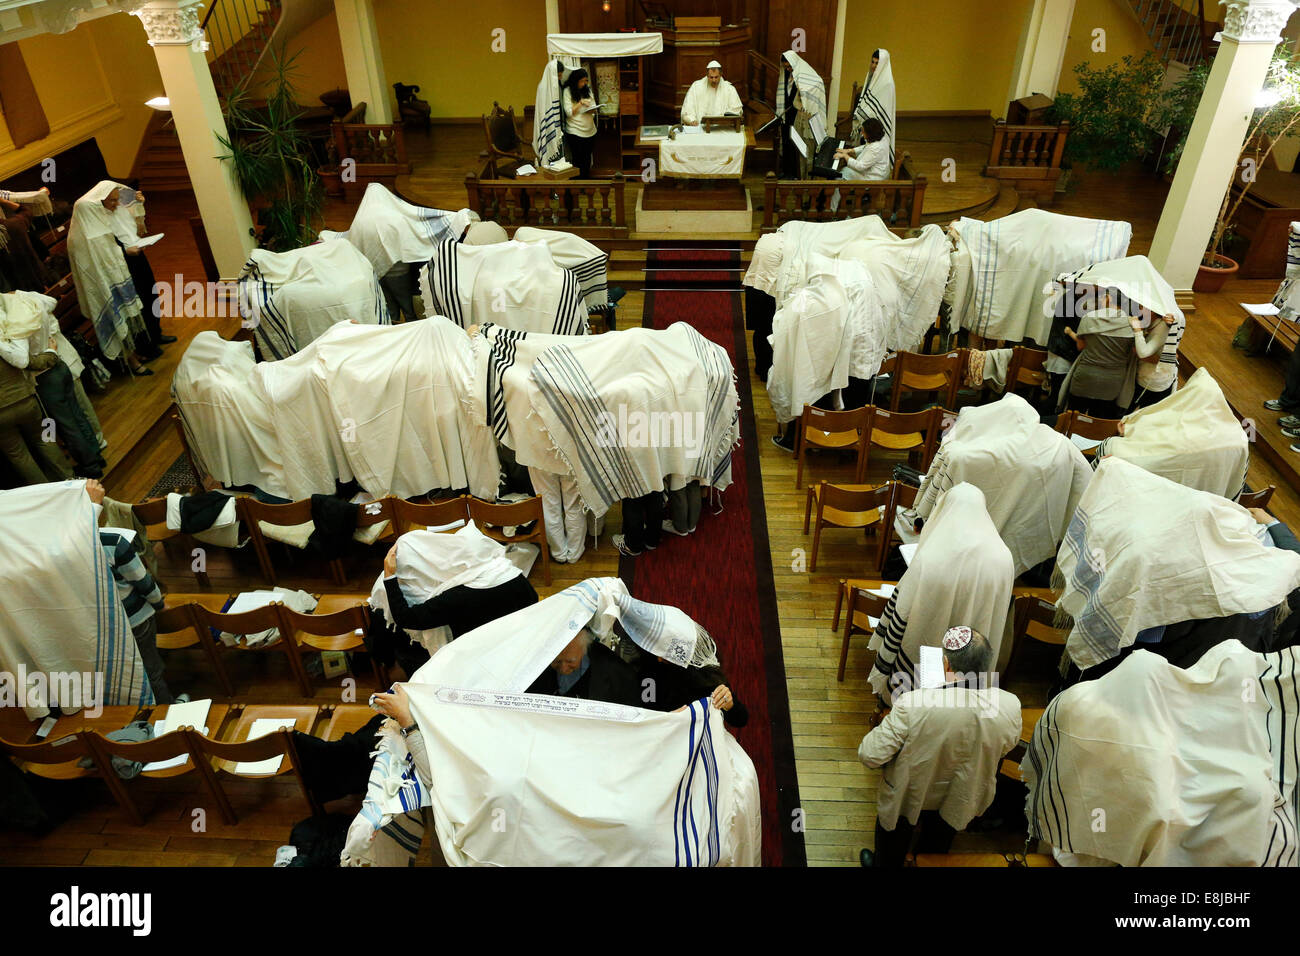 Yom Kippur also known as Day of Atonement, is the holiest day of the year for the Jewish people. Stock Photo